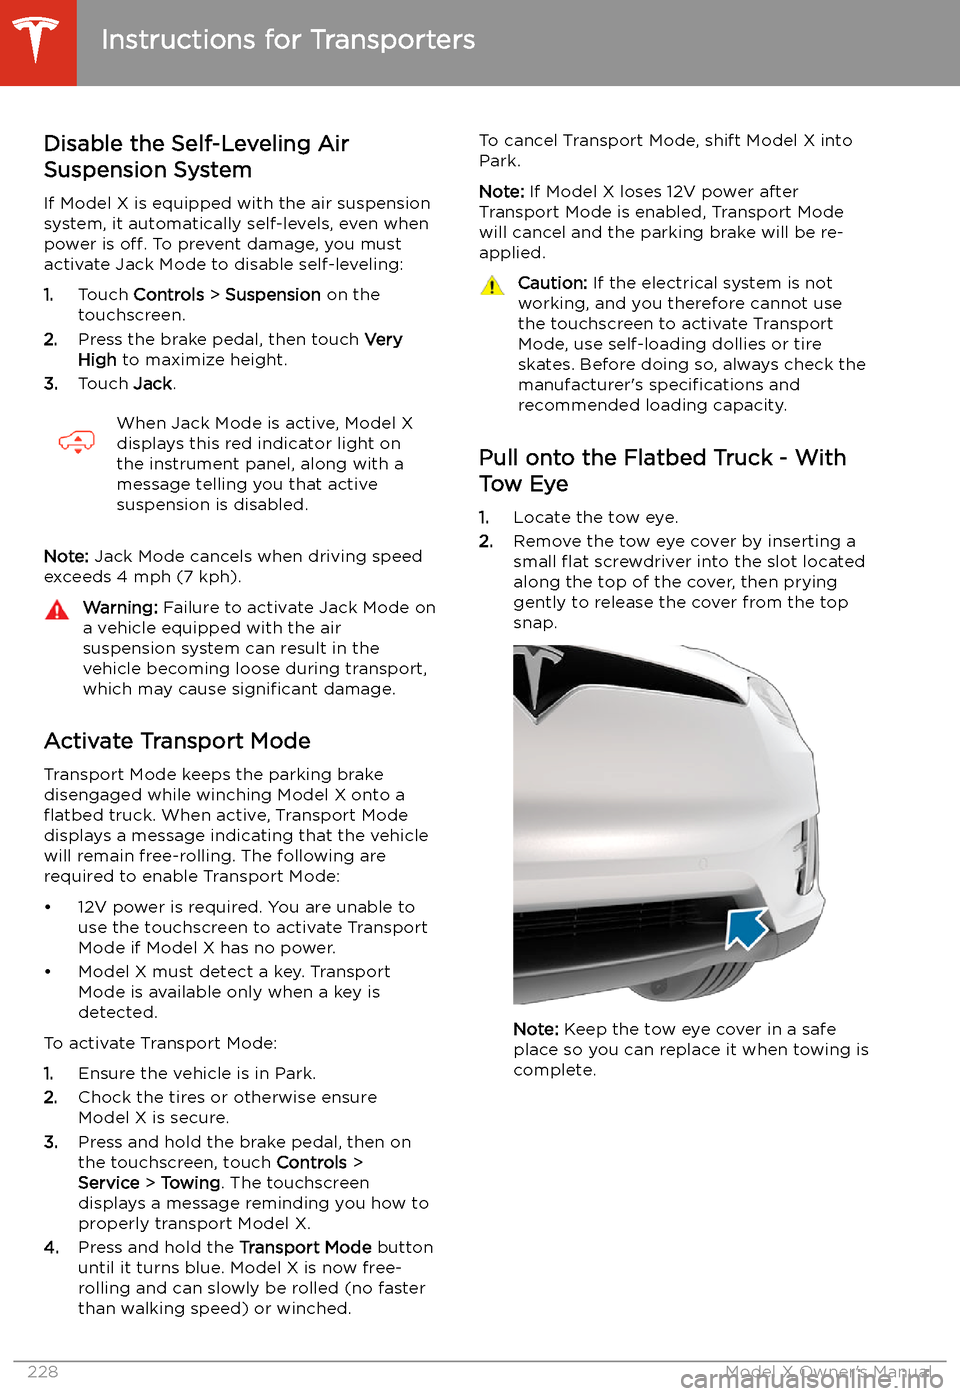 TESLA MODEL X 2020  Owners Manual Disable the Self-Leveling AirSuspension System
If Model X is equipped with the air suspension
system, it automatically self-levels, even when
power is  off. To prevent damage, you must
activate Jack M